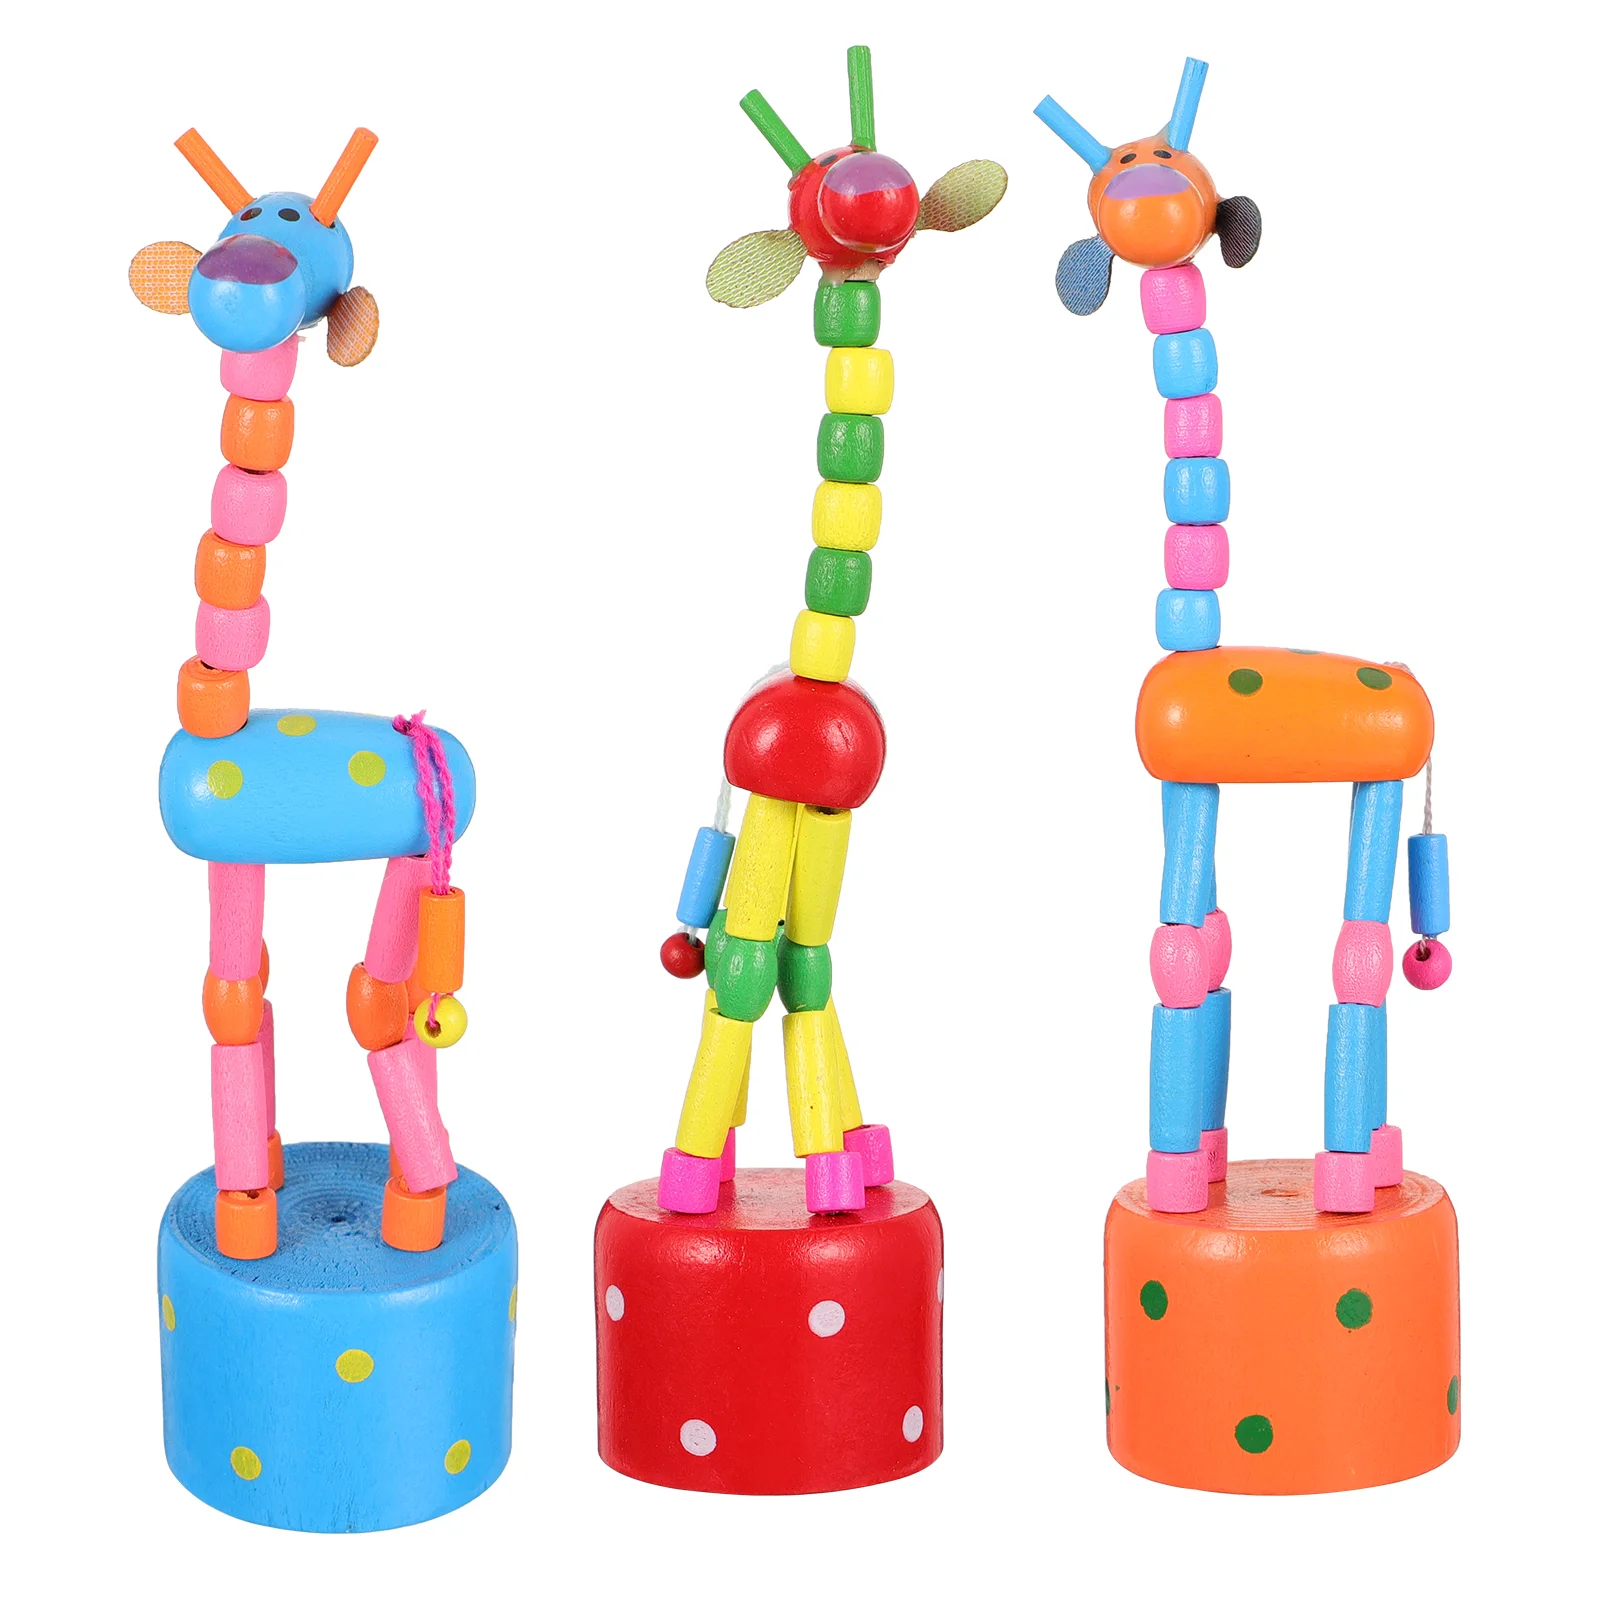 

Toy Giraffe Kids Animal Wooden Finger Puppets Dancing Party Toys Puppet Figurine Favors Wood Ornament Thumb Birthday Push